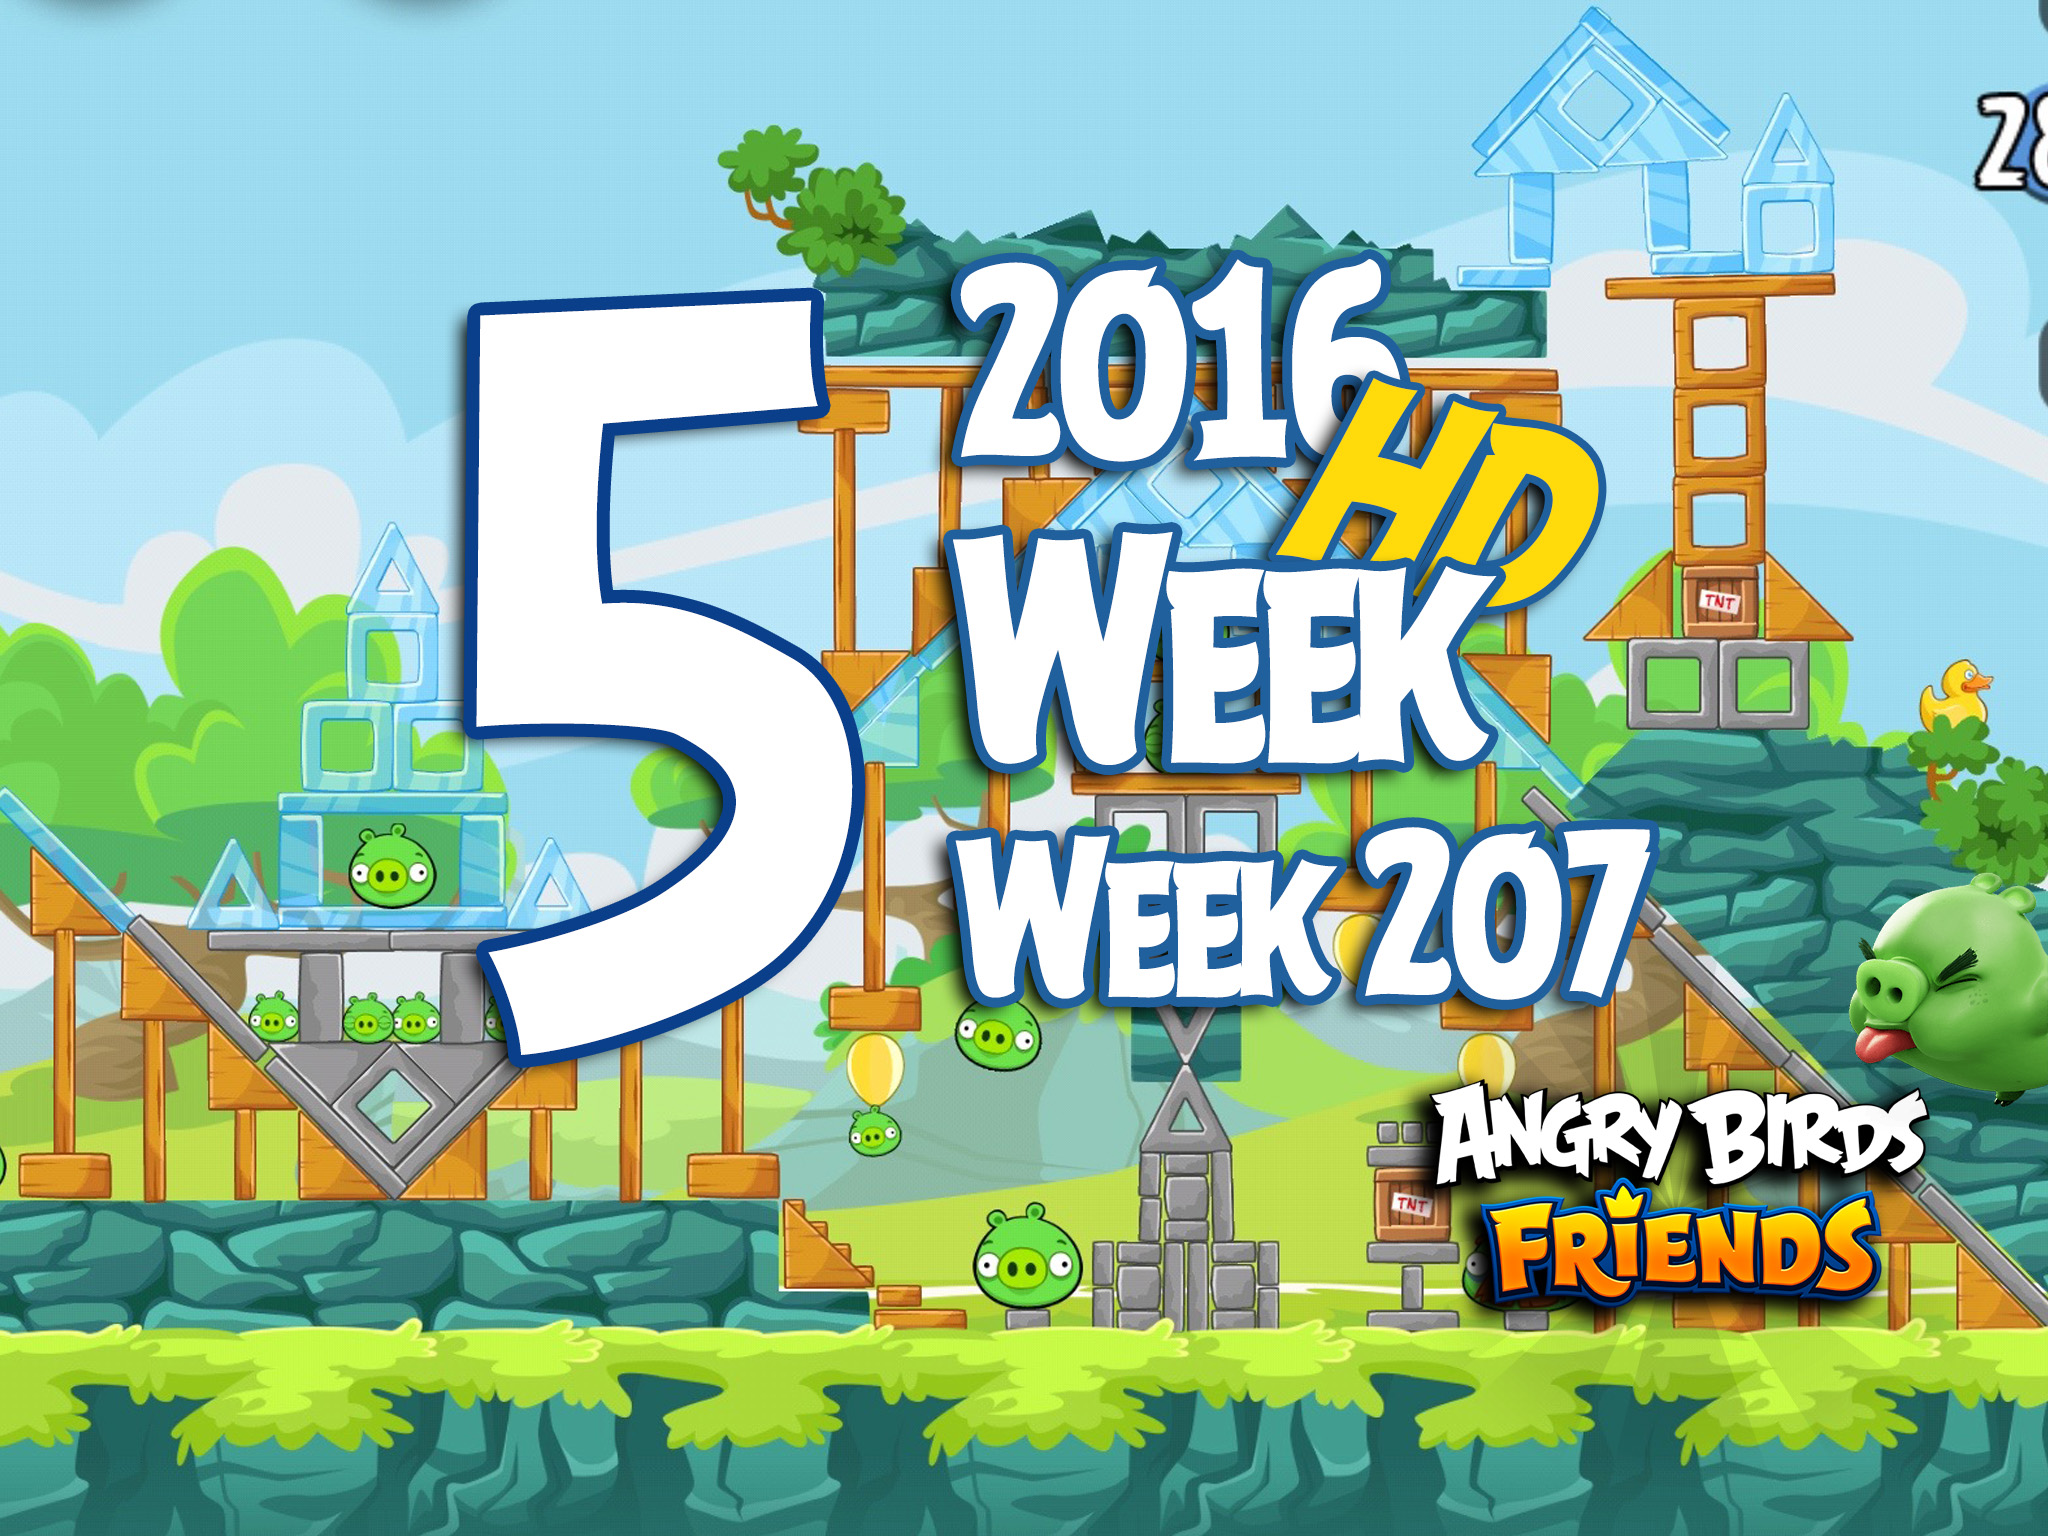 Angry Birds Friends Tournament Level 5 Week 207 Walkthrough | May 5th 2016